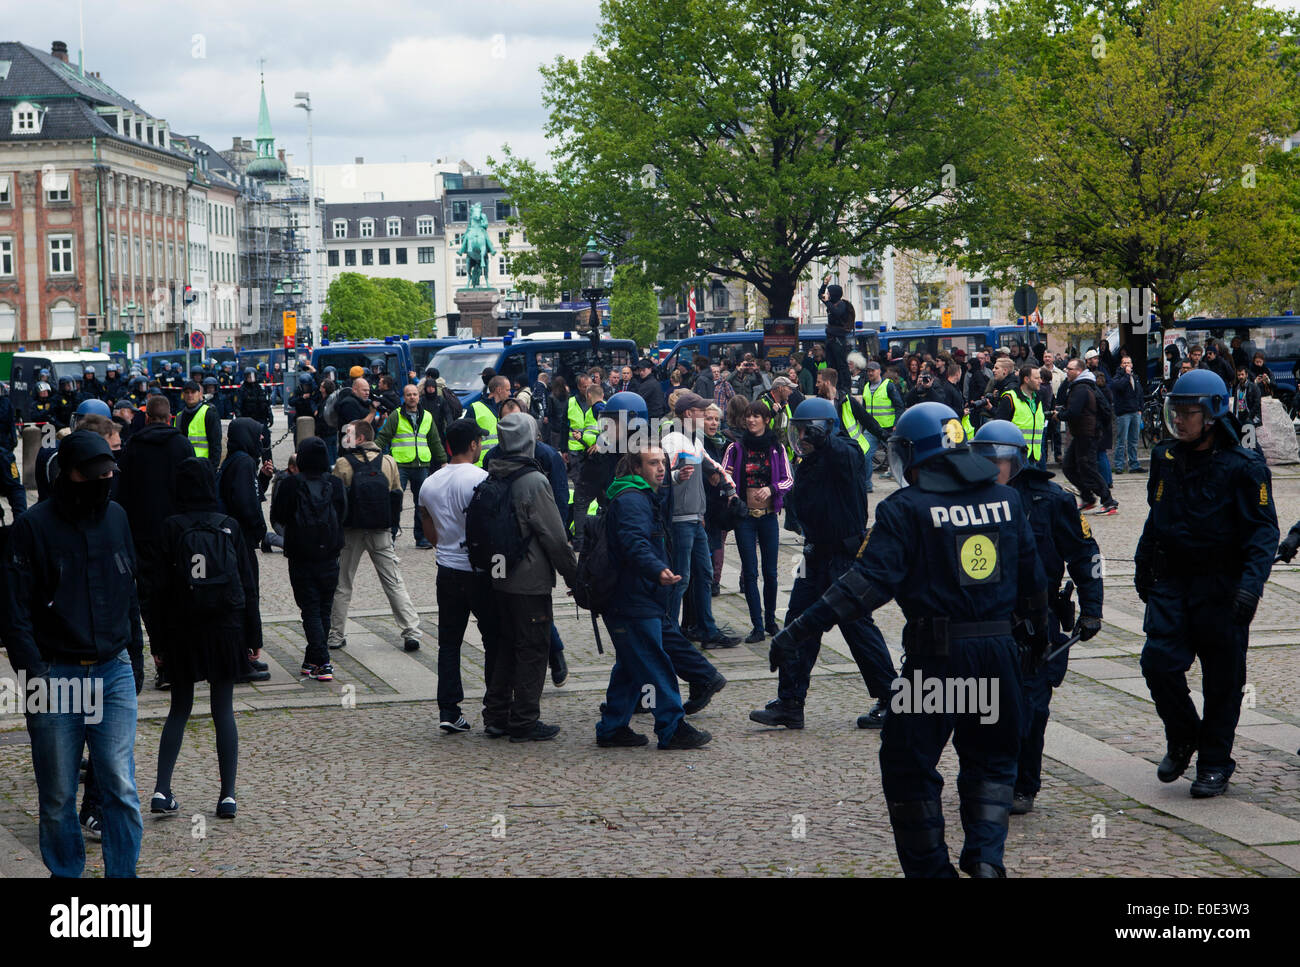 Copenhagen, Denmark. 10th May, 2014. Danish neo-Nazi party  demonstration in front of the parliament under the slogan: “No to Islamization” took place under heavy police protection and was finally interrupted by an anti fascist counter-demonstration. Eventually police cleared the square. This took place just a few hours before the Eurovision Song Contest final. Credit:  OJPHOTOS/Alamy Live News Stock Photo